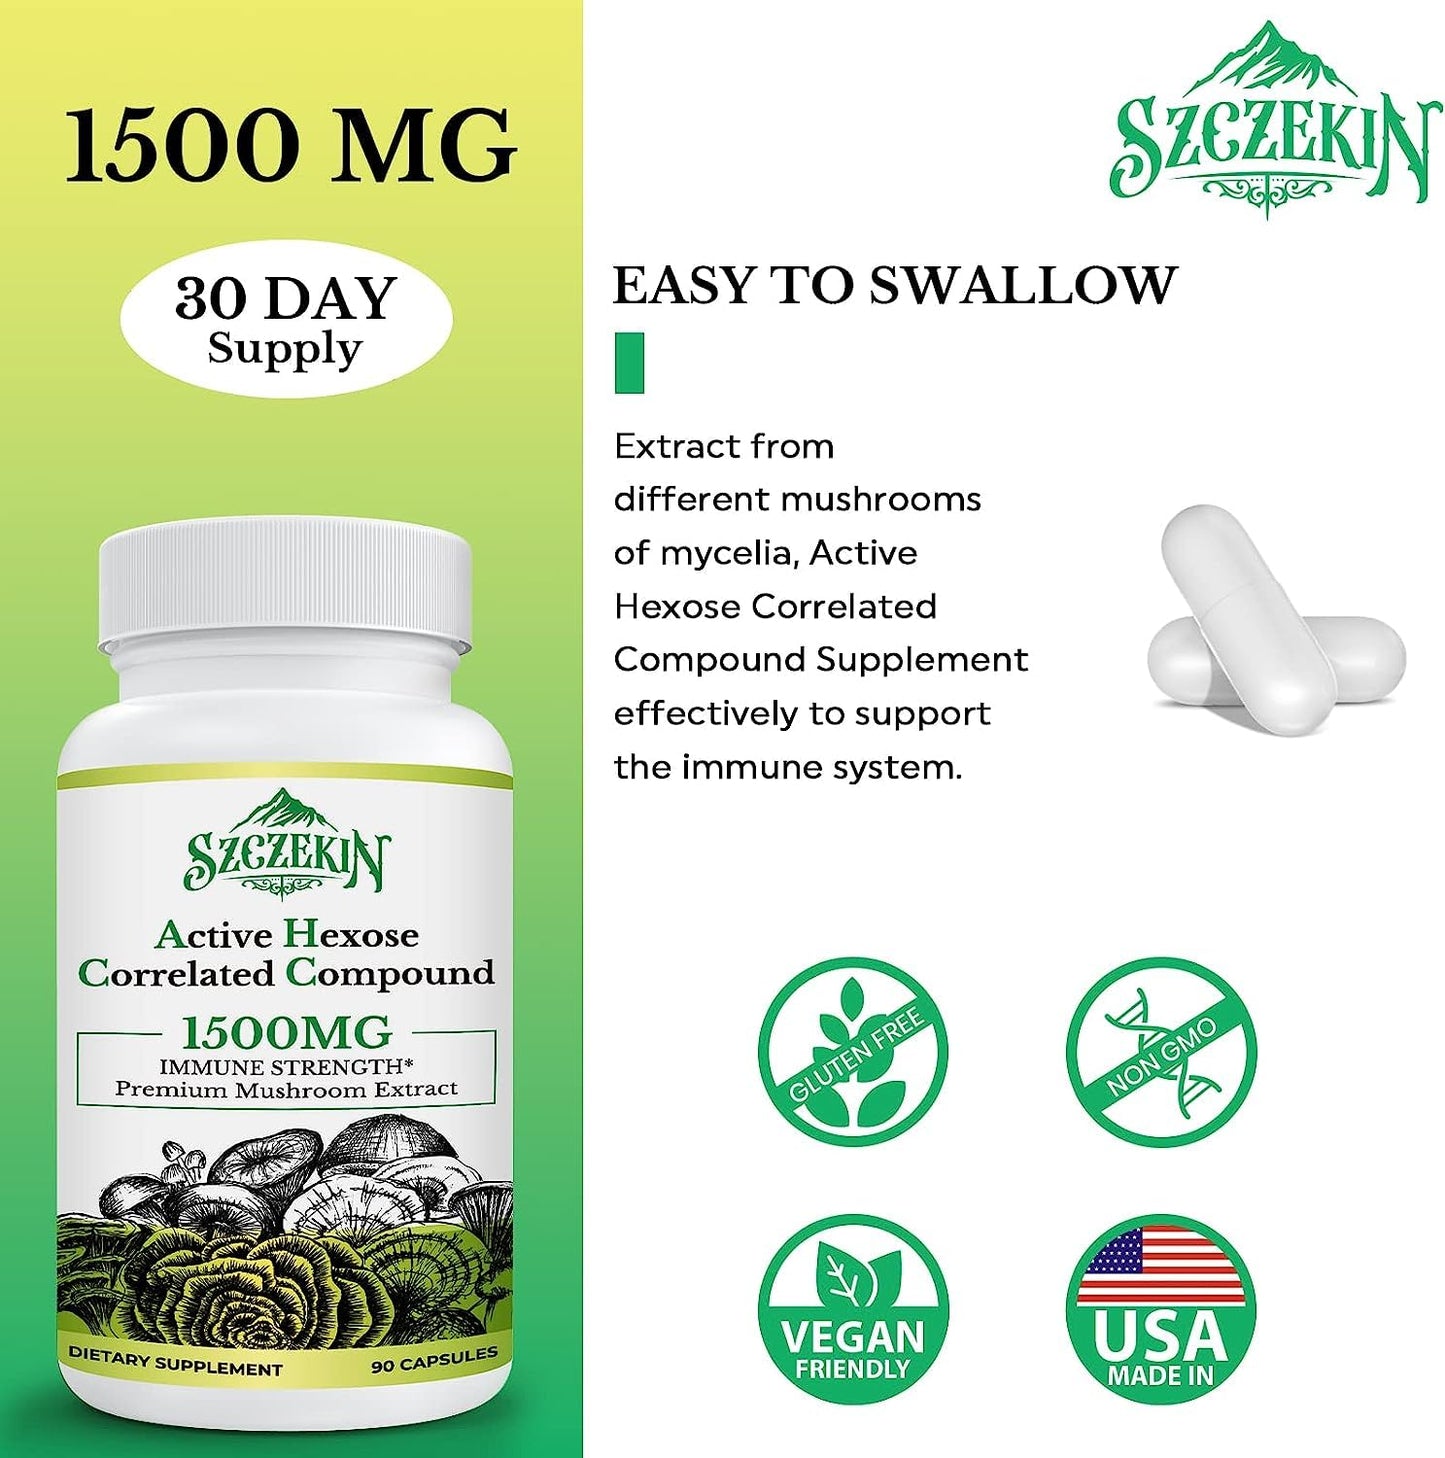 SZCZEKIN Active Hexose Correlated Compound 1500 mg Supplement, Natural 8 Mushroom Extract Supplement, Immune System, Liver Function, Natural Killer and T Cells Activity, 180 Veggie Capsules